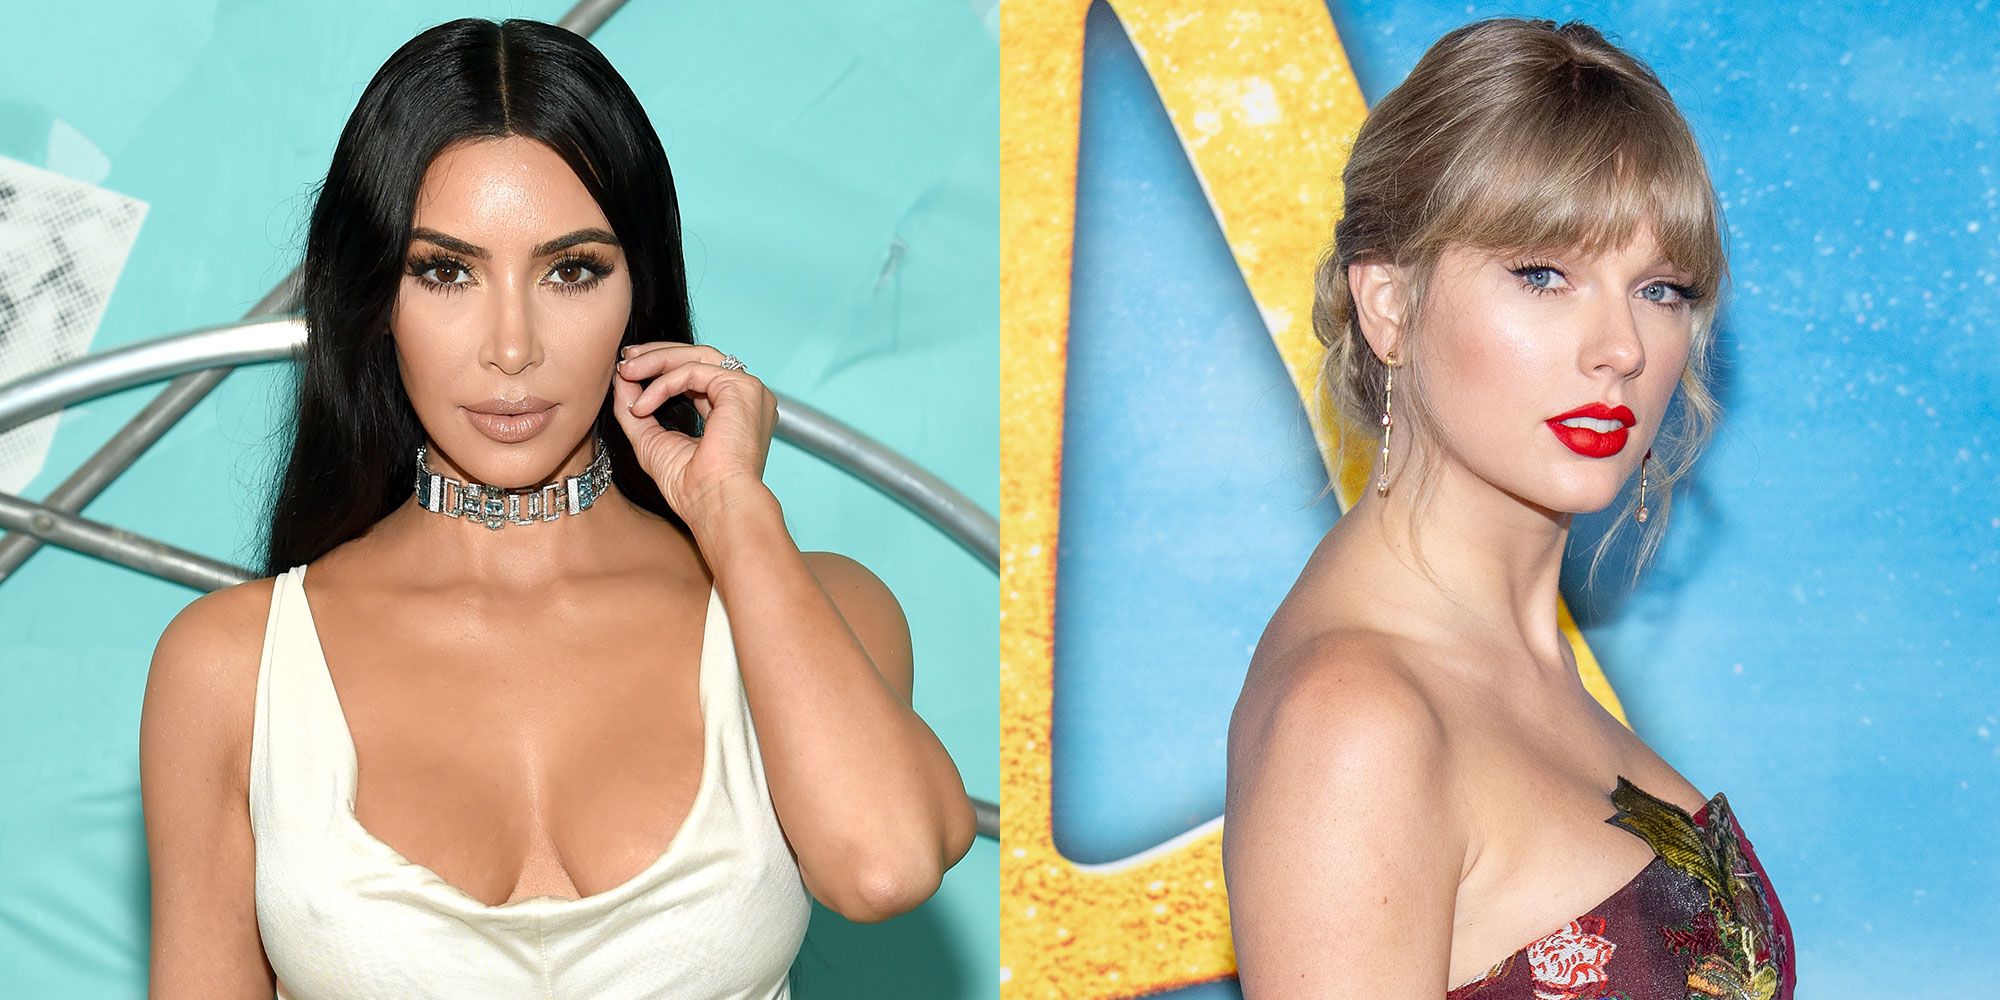 “Taylor Swift responds to Kim Kardashian’s recent comments with a firm but polite message: ‘I don’t have time for petty drama, but I think you could use a lesson in kindness and respect.’ Swift’s statement is a clear indication that she’s not going to engage in any back-and-forth with Kardashian - Football Blog